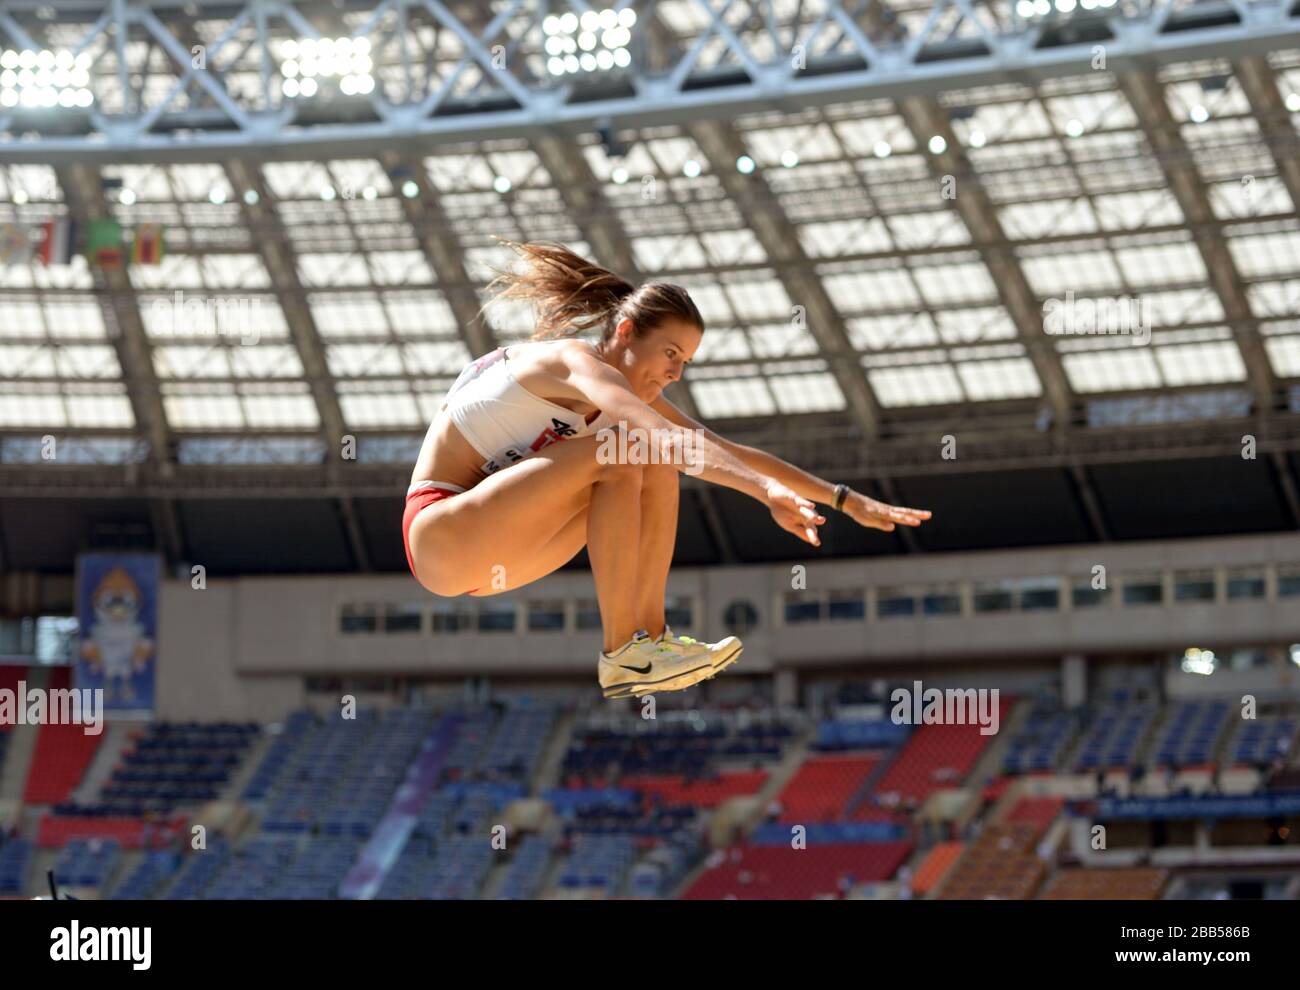 Poland's Anna Jagaciak competes in the Women's Triple Jump qualification on day four of the 2013 IAAF World Athletics Championships at the Luzhniki Stadium in Moscow, Russia. Stock Photo